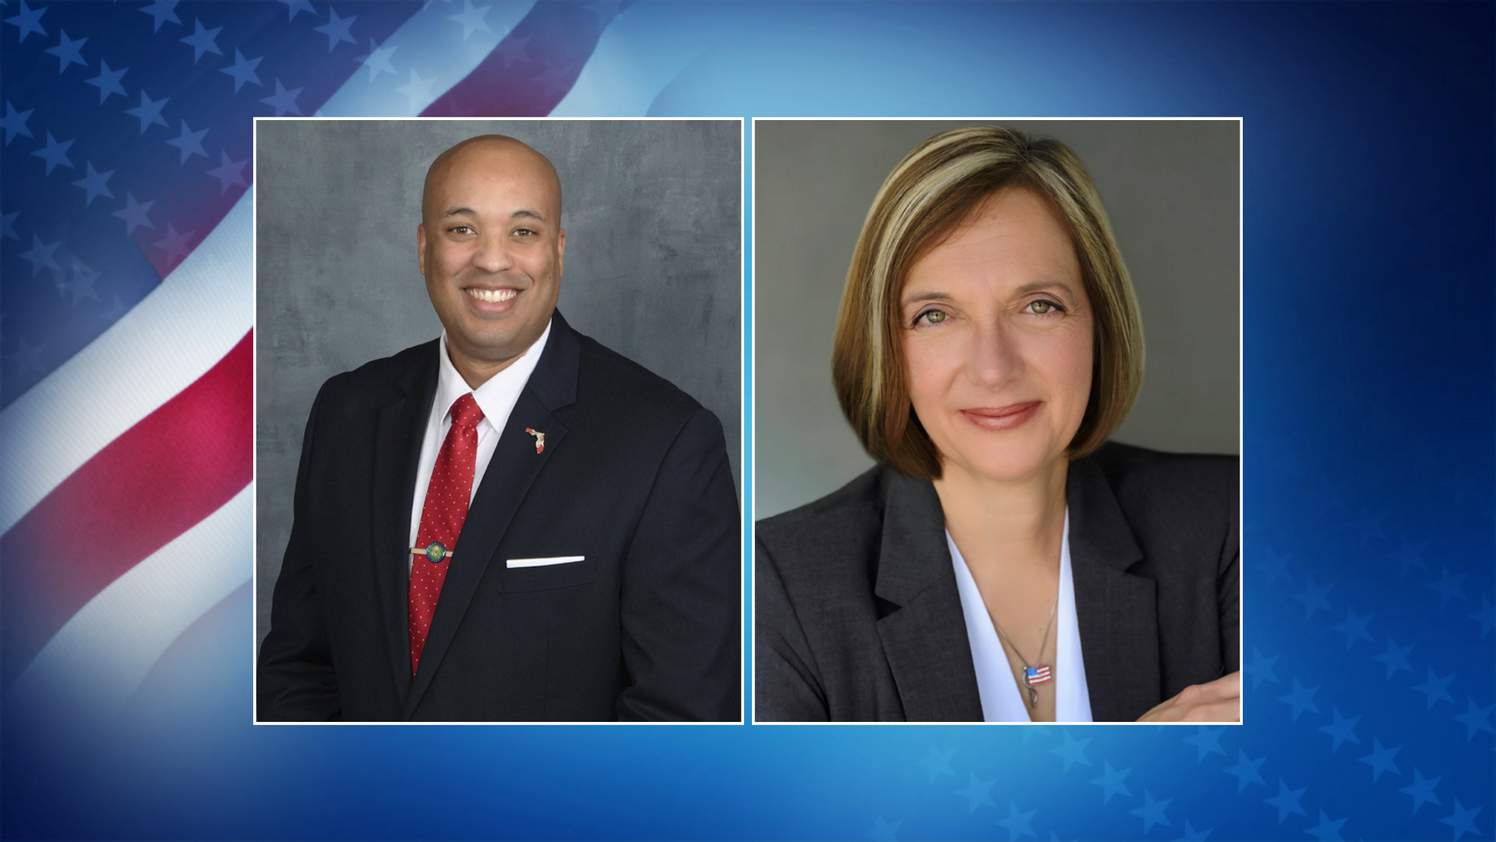 Meet the candidates: Here’s who’s running to be Seminole County’s supervisor of elections